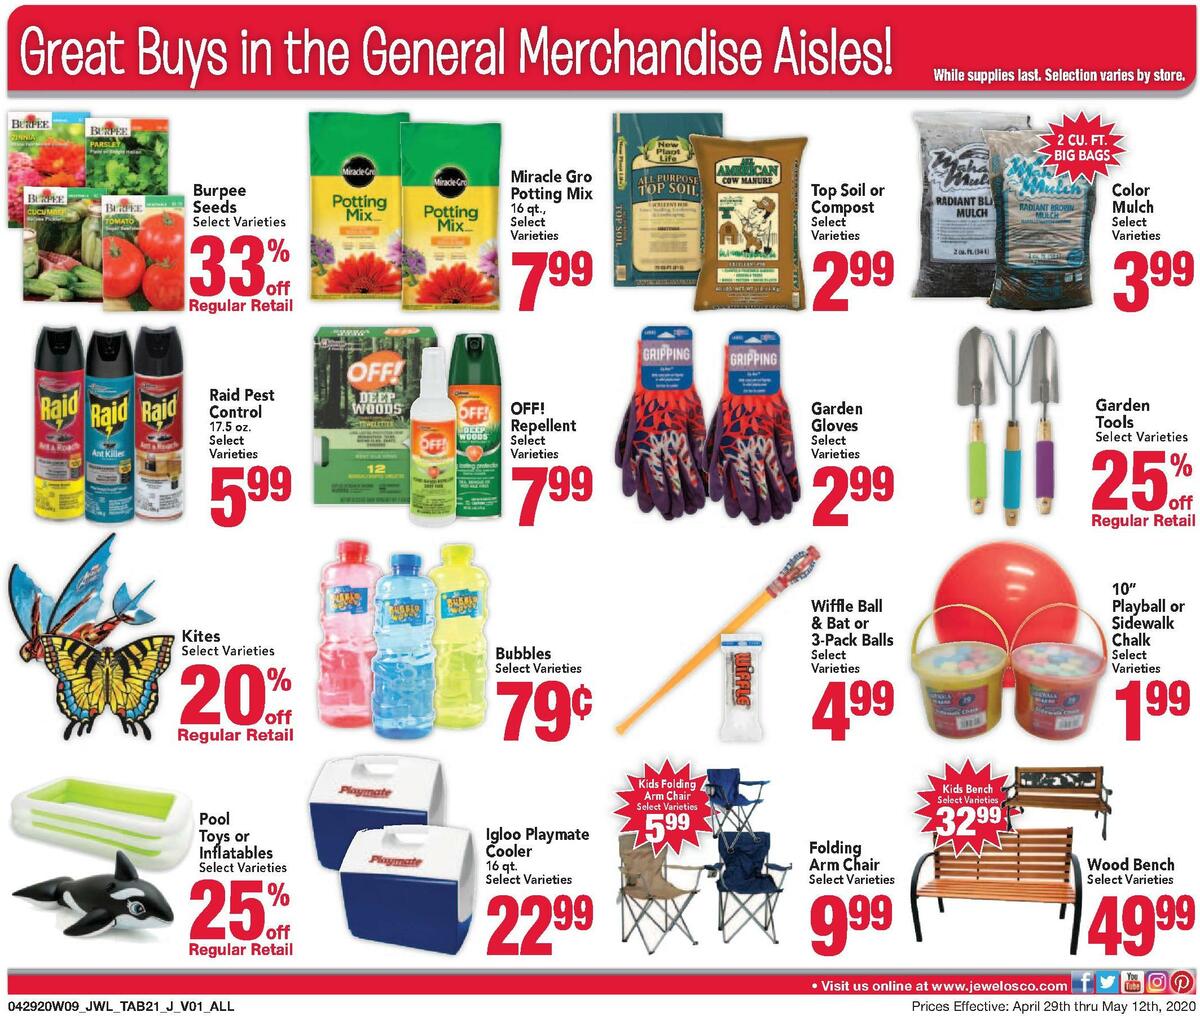 Jewel Osco Big Book of Savings Weekly Ad from April 29